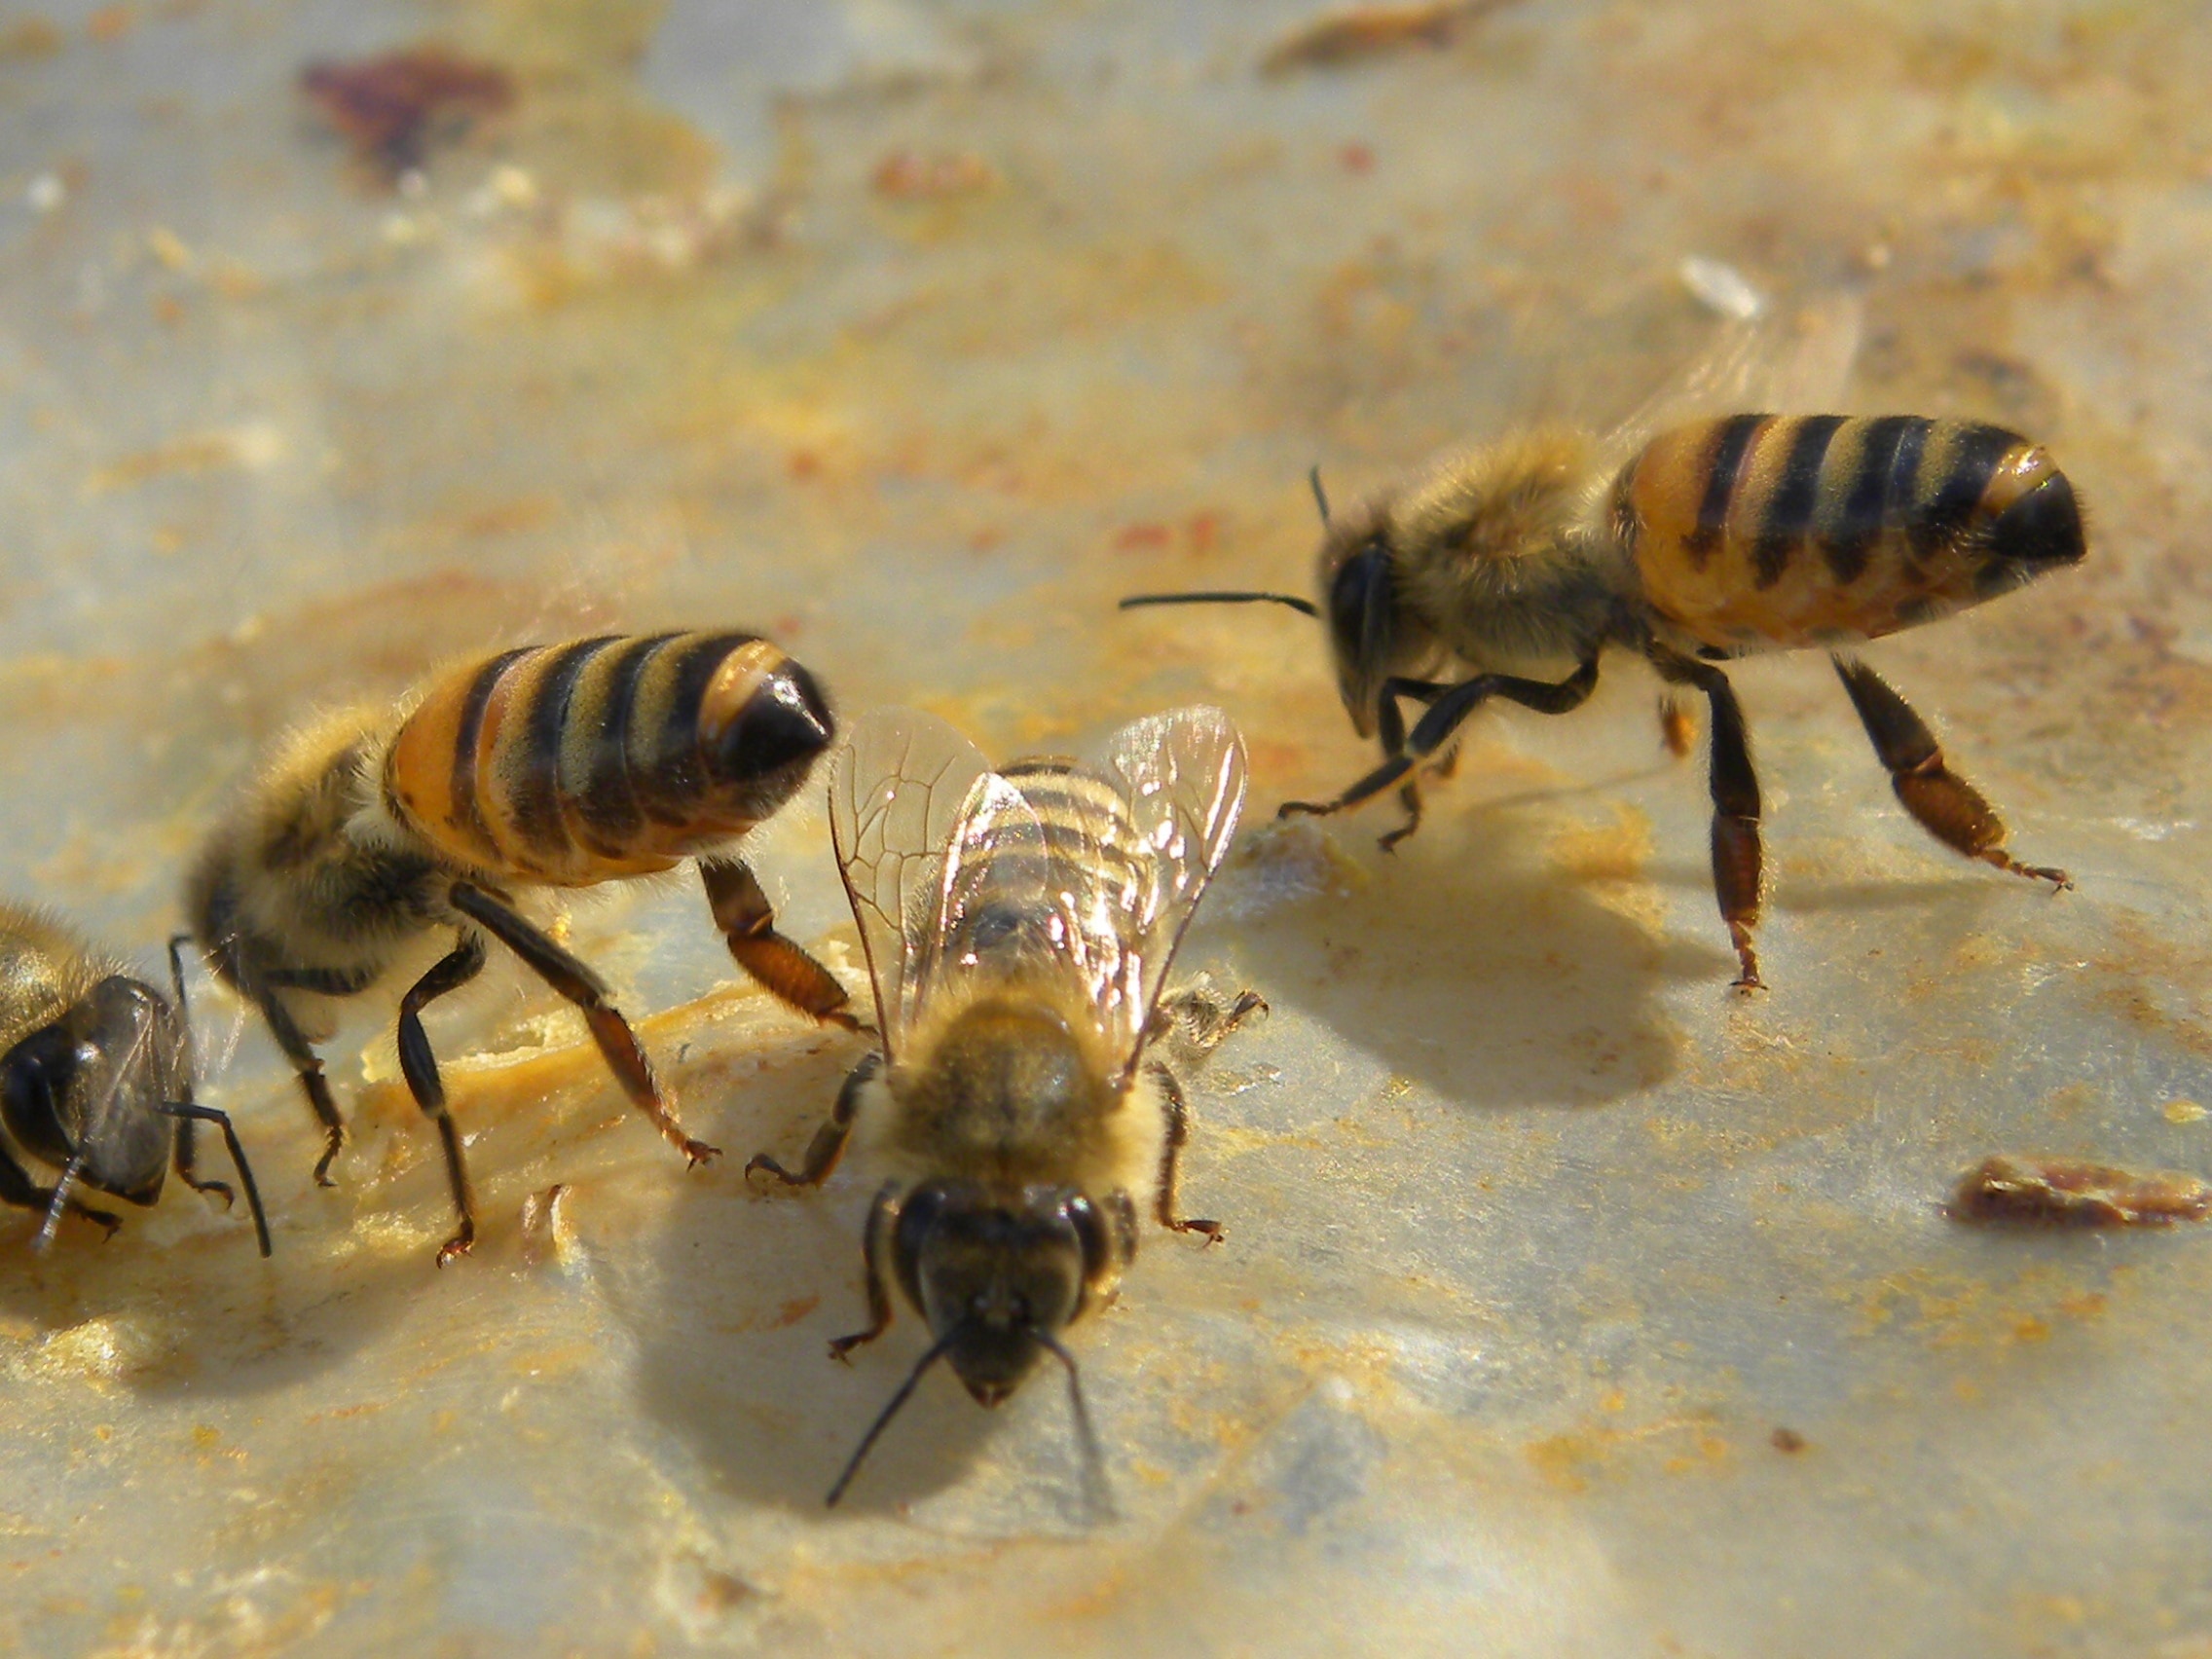 four yellow and black bees on top of a white surface